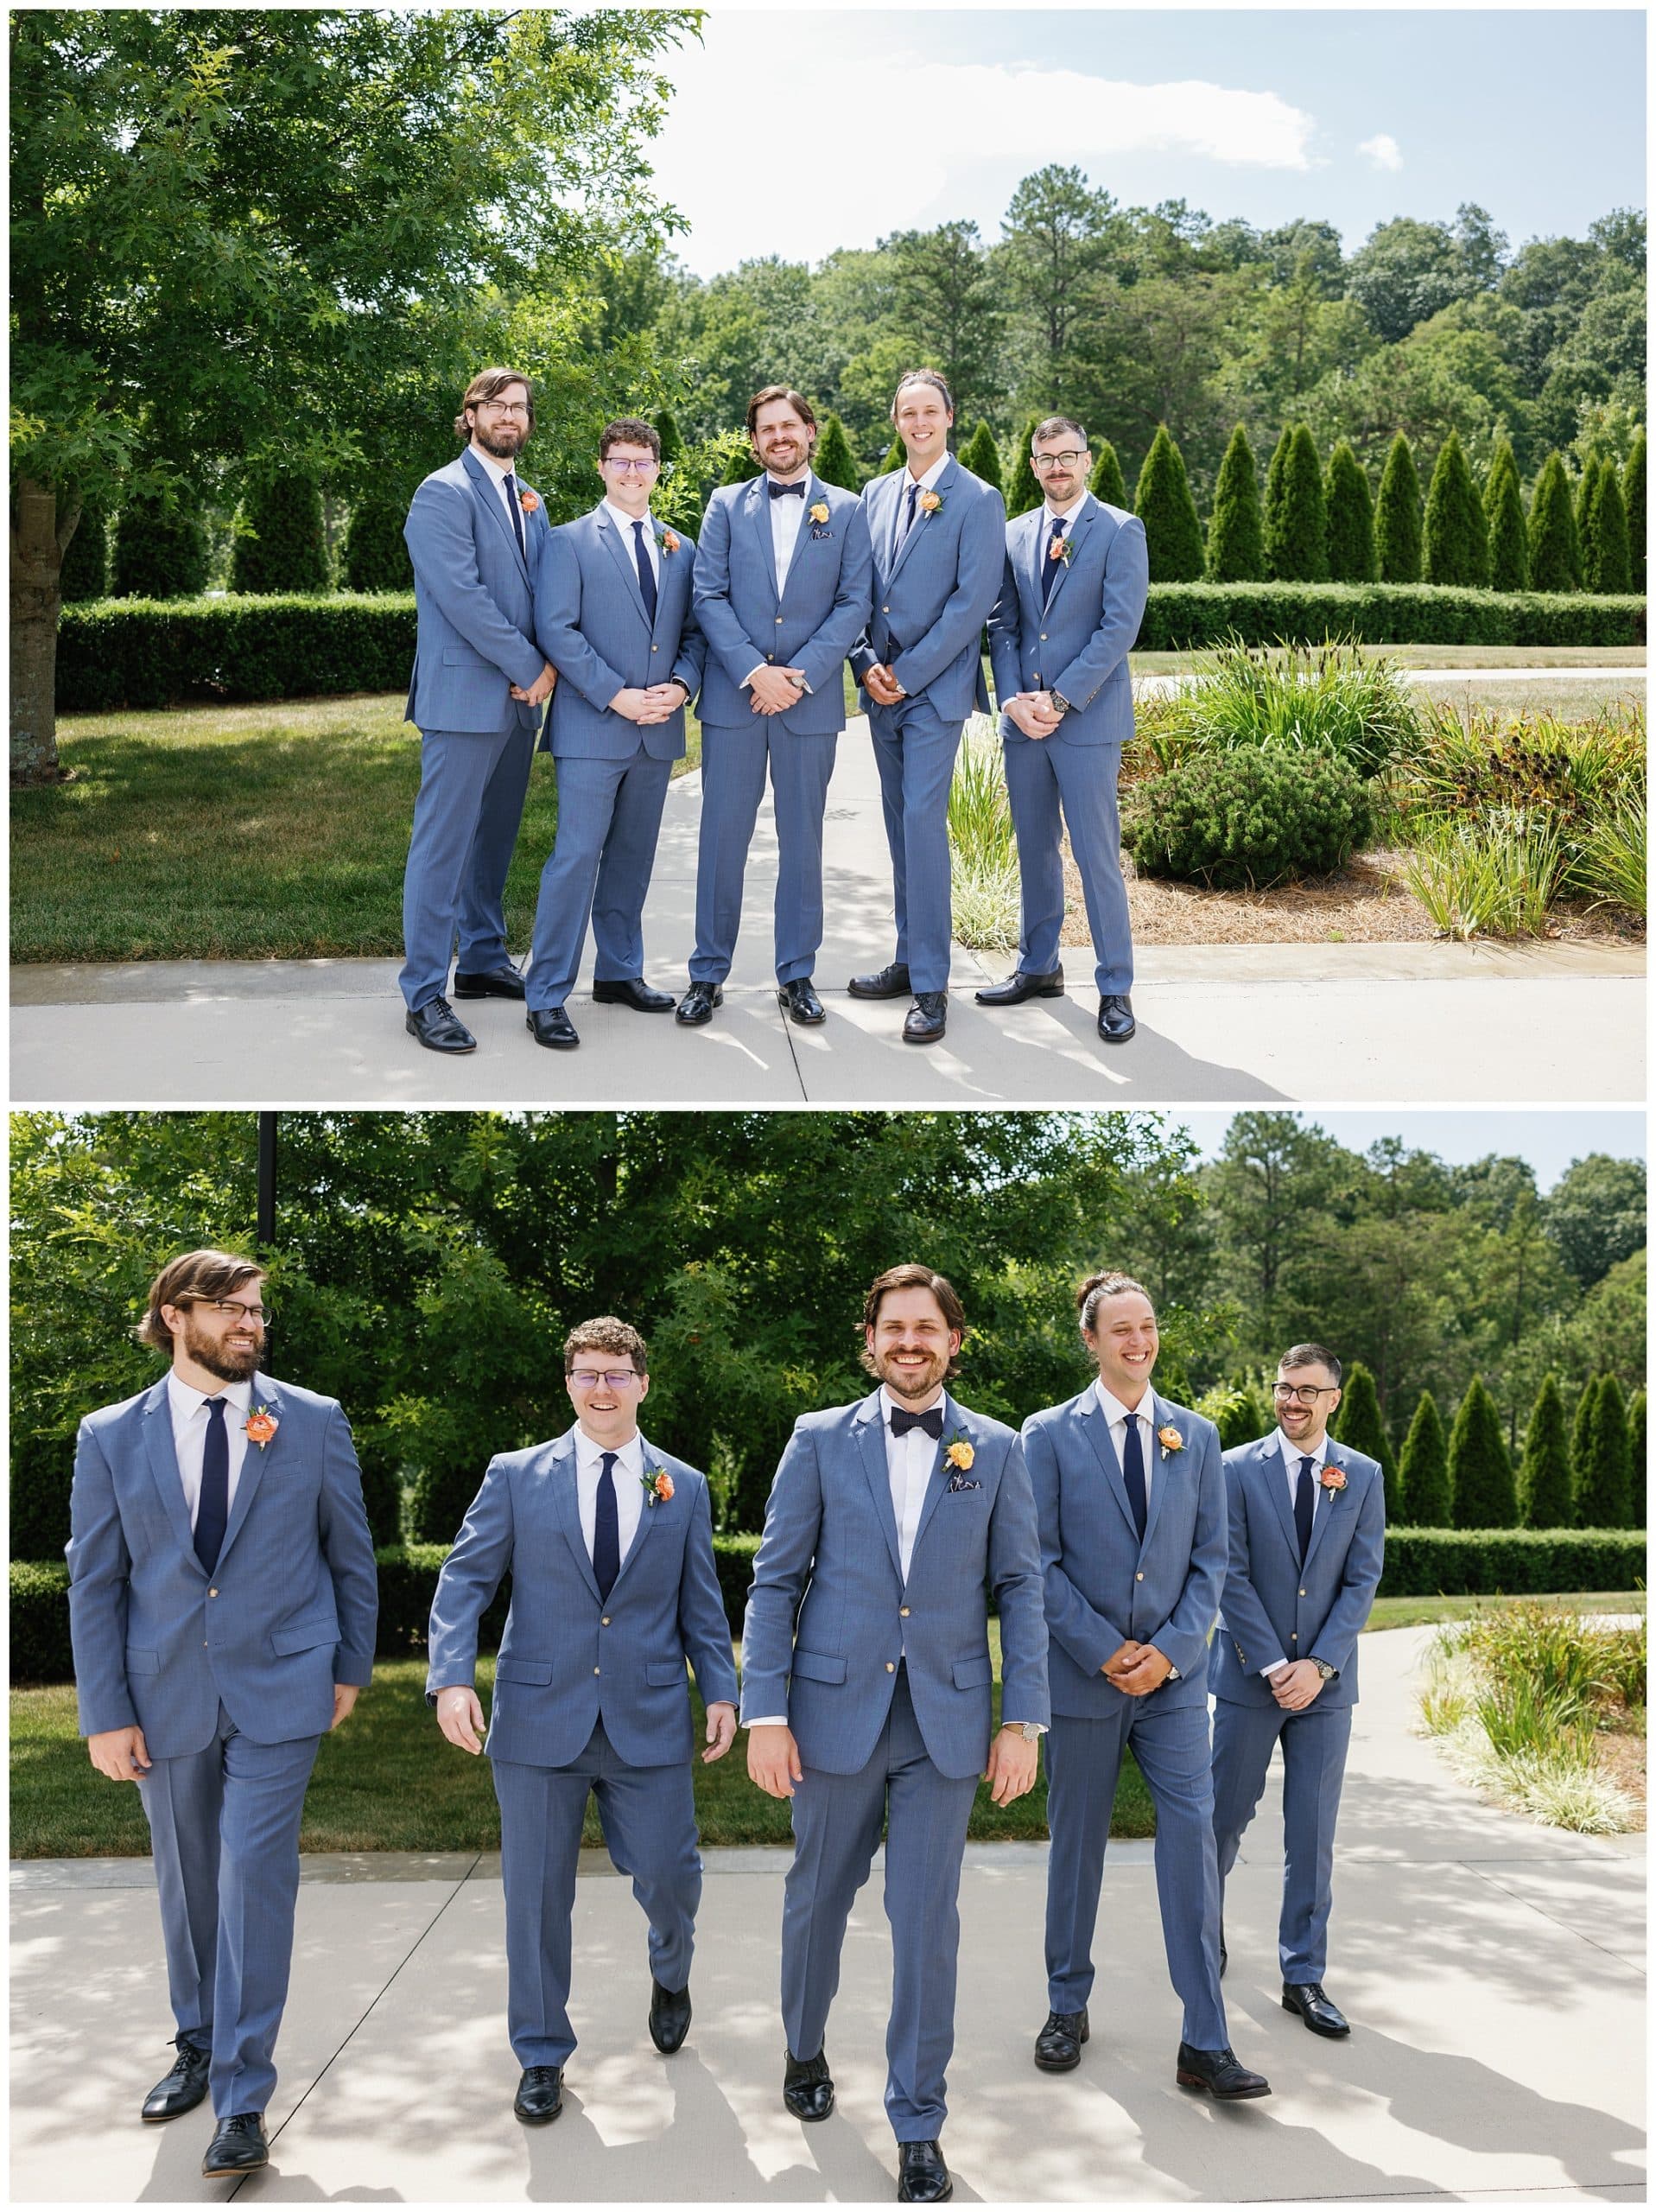 A group of groomsmen in blue tuxedos.